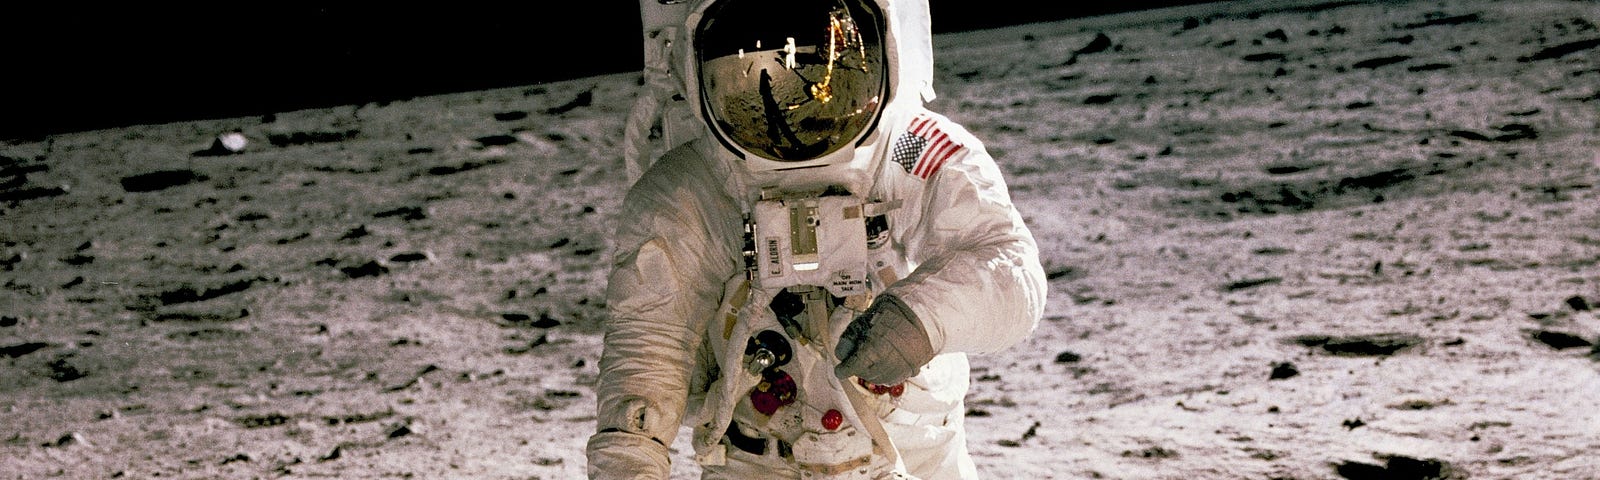 Neil armstrong walking on the moon